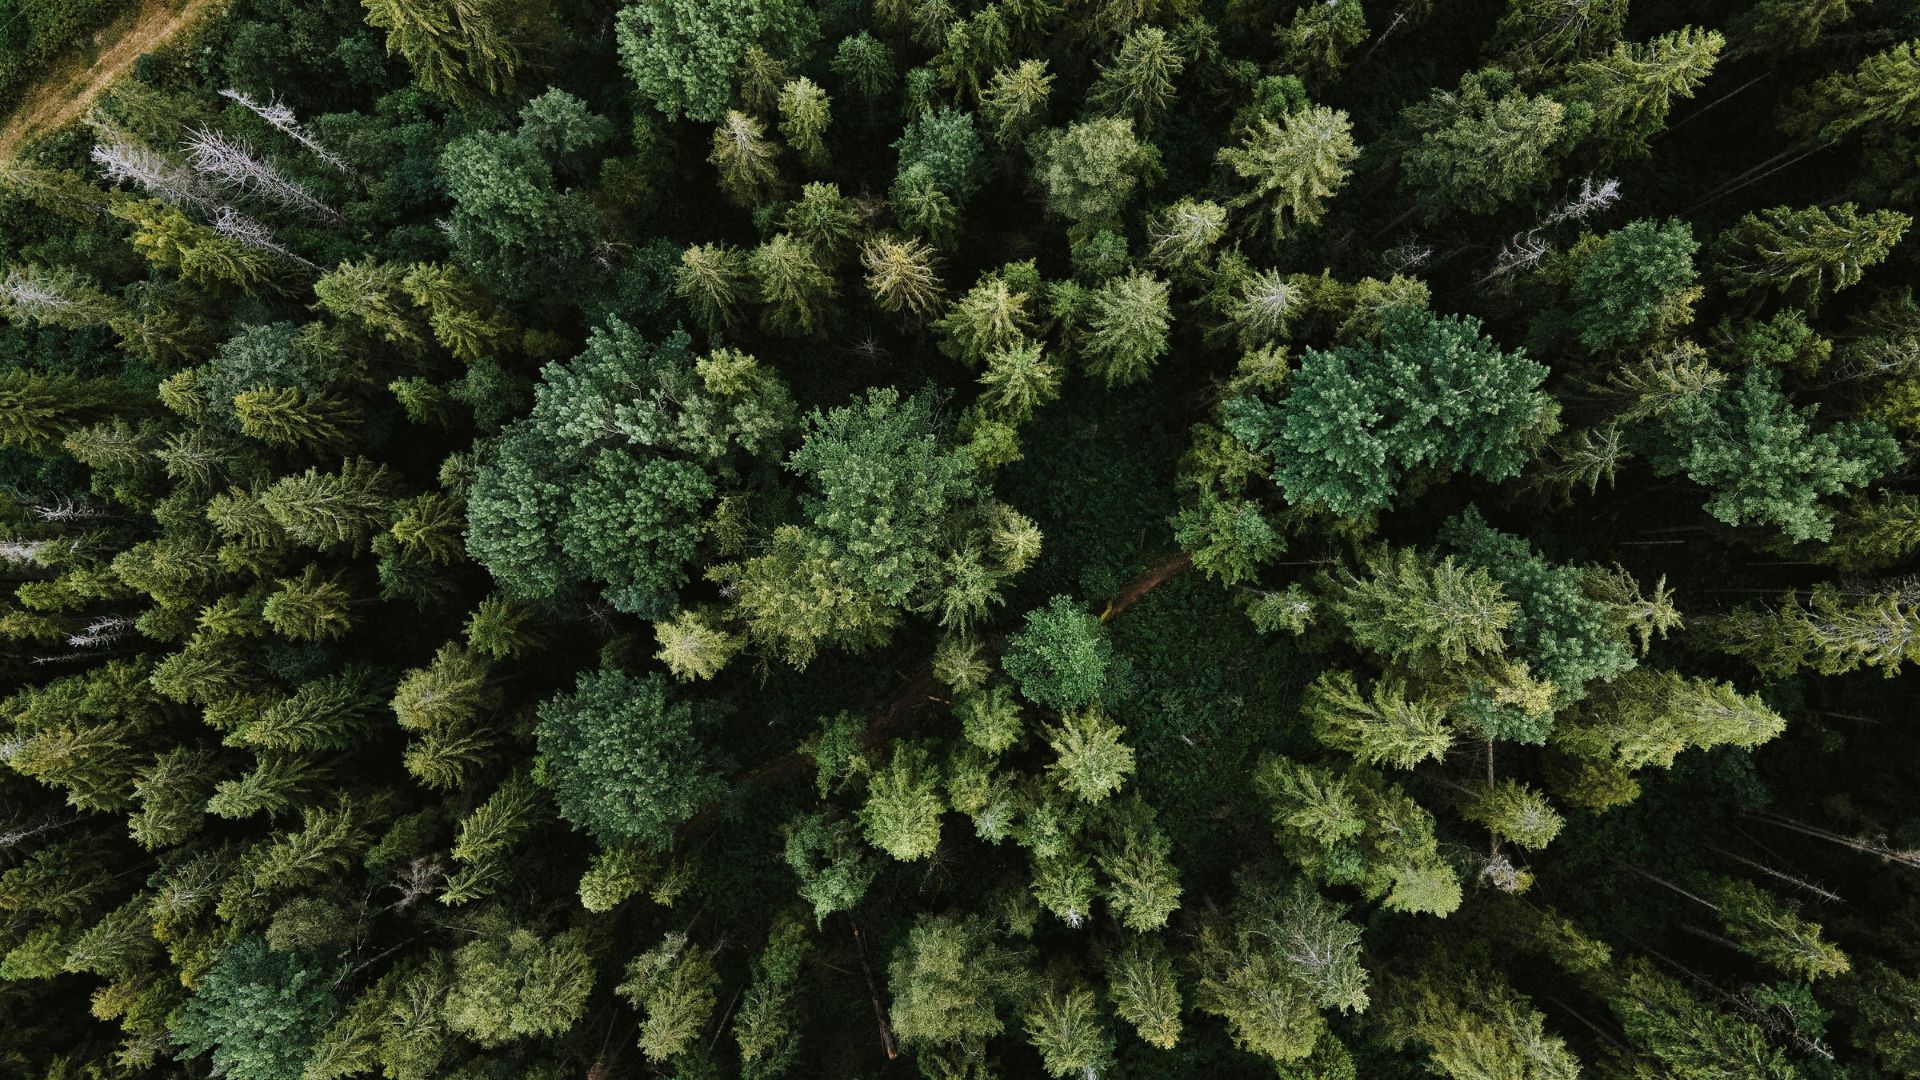 Aerial view of pine trees in a forest